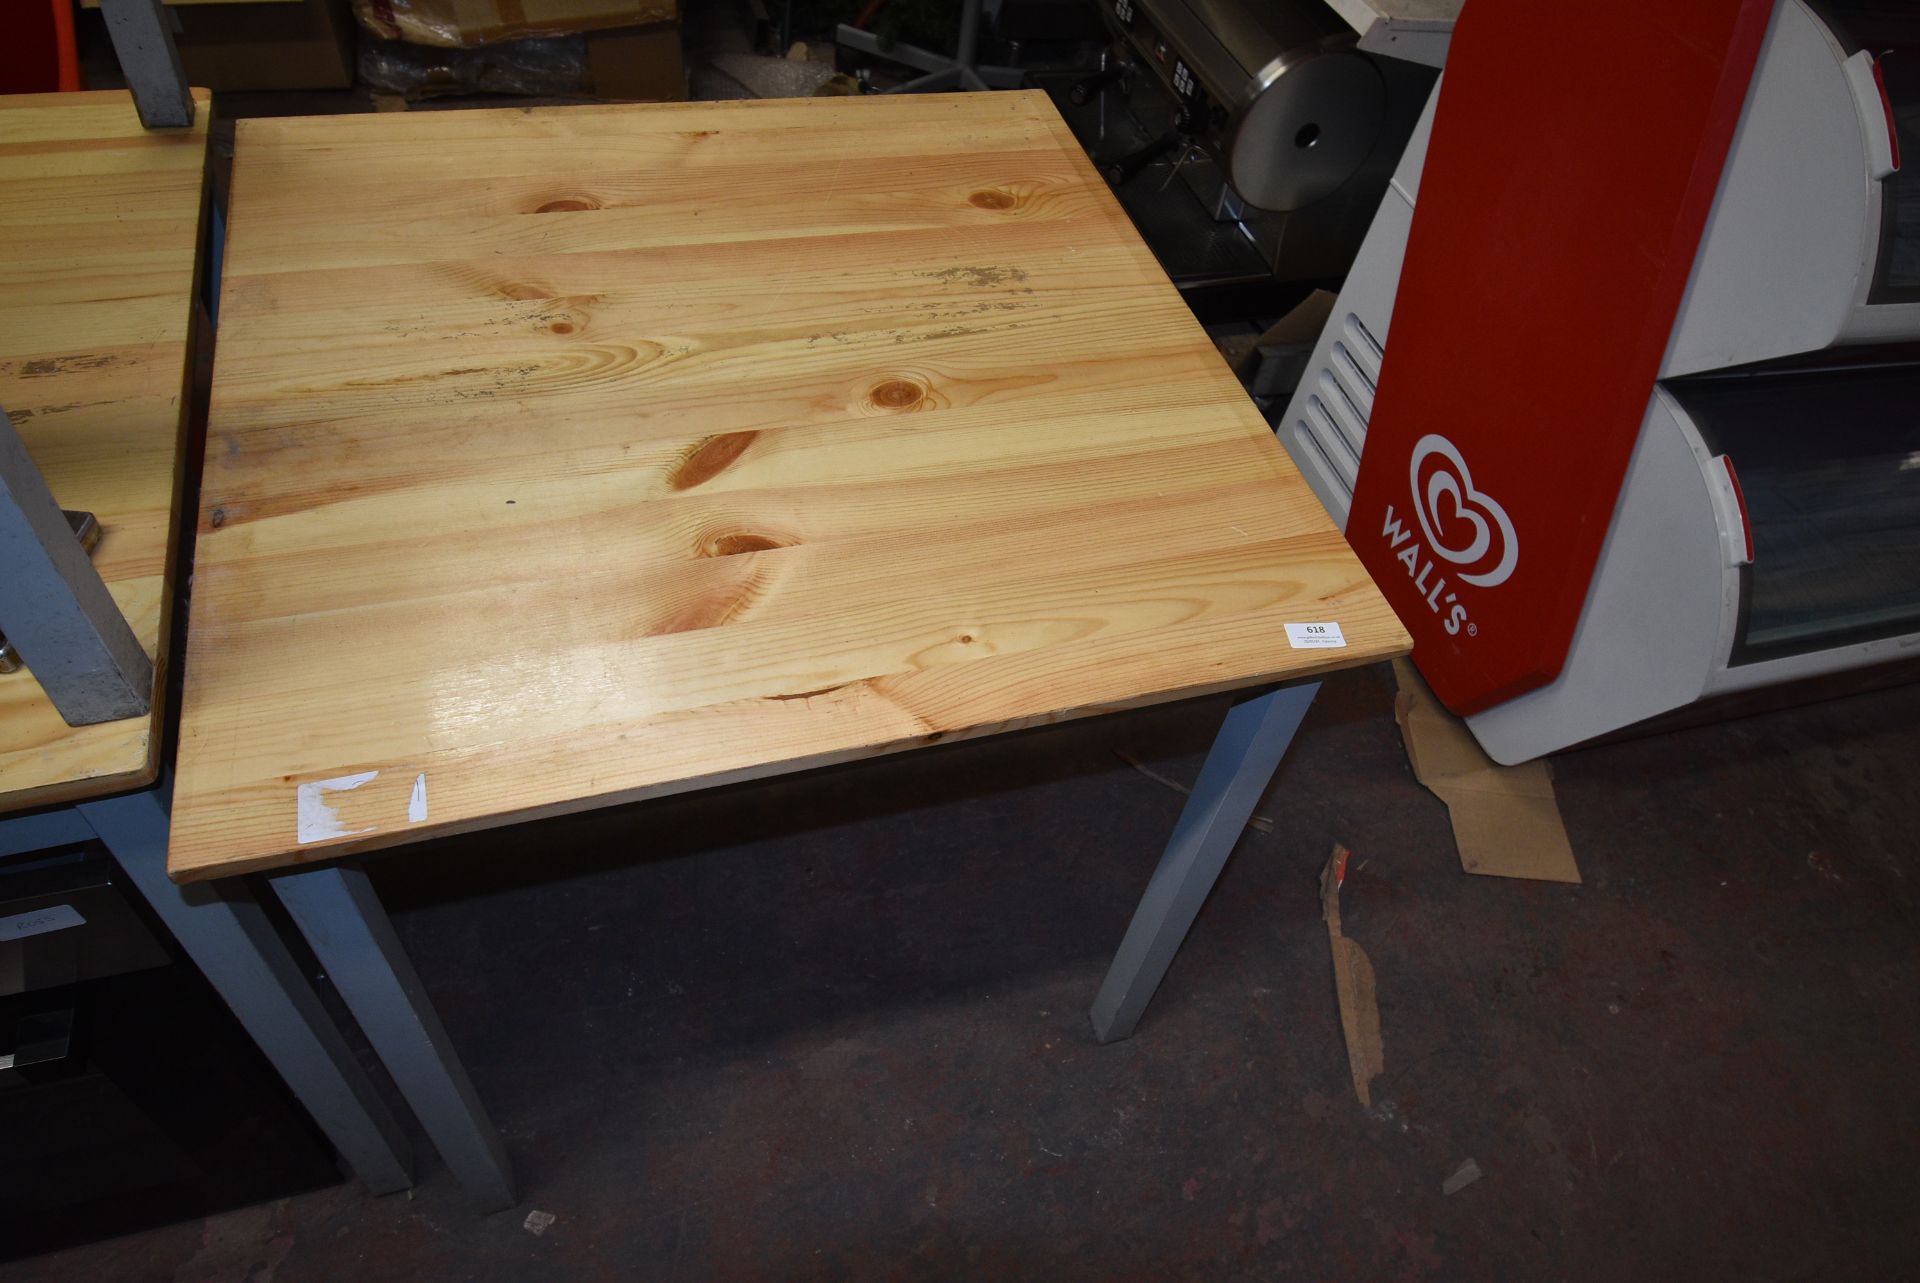 Lightweight 75cm Square Table